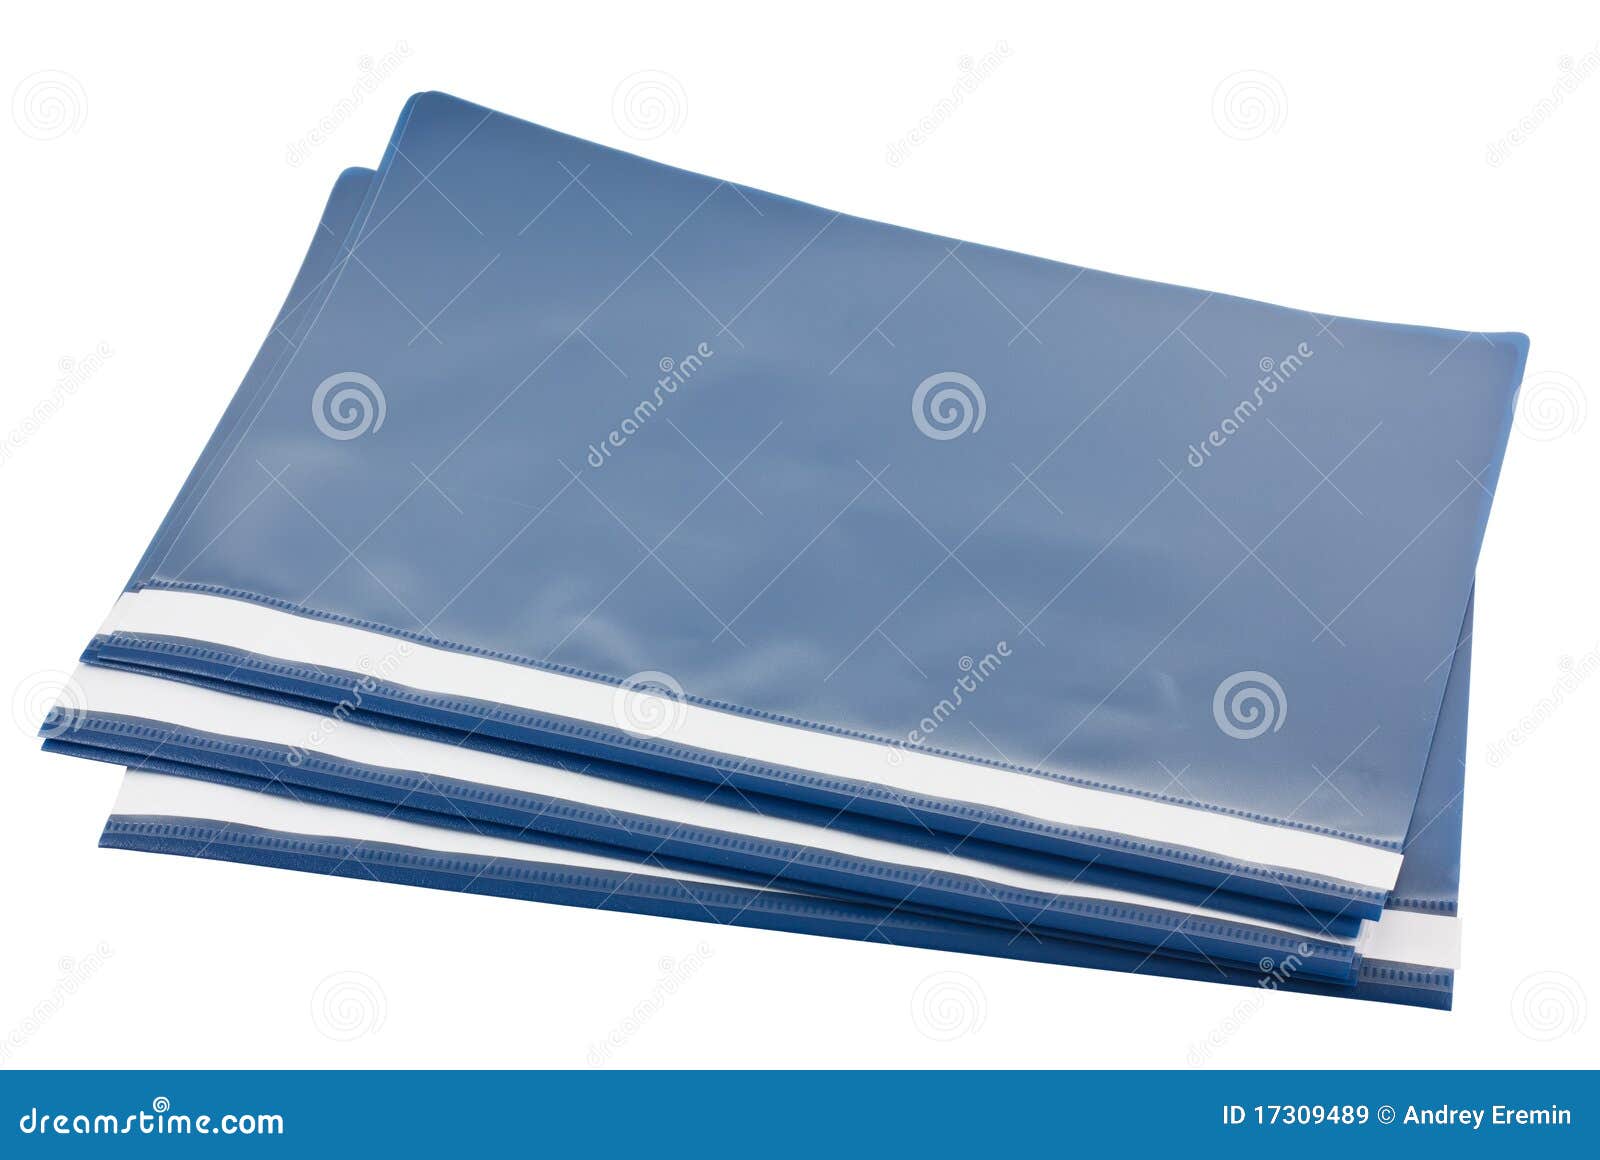 Empty folders stock image. Image of indoors, stack, transparent - 17309489